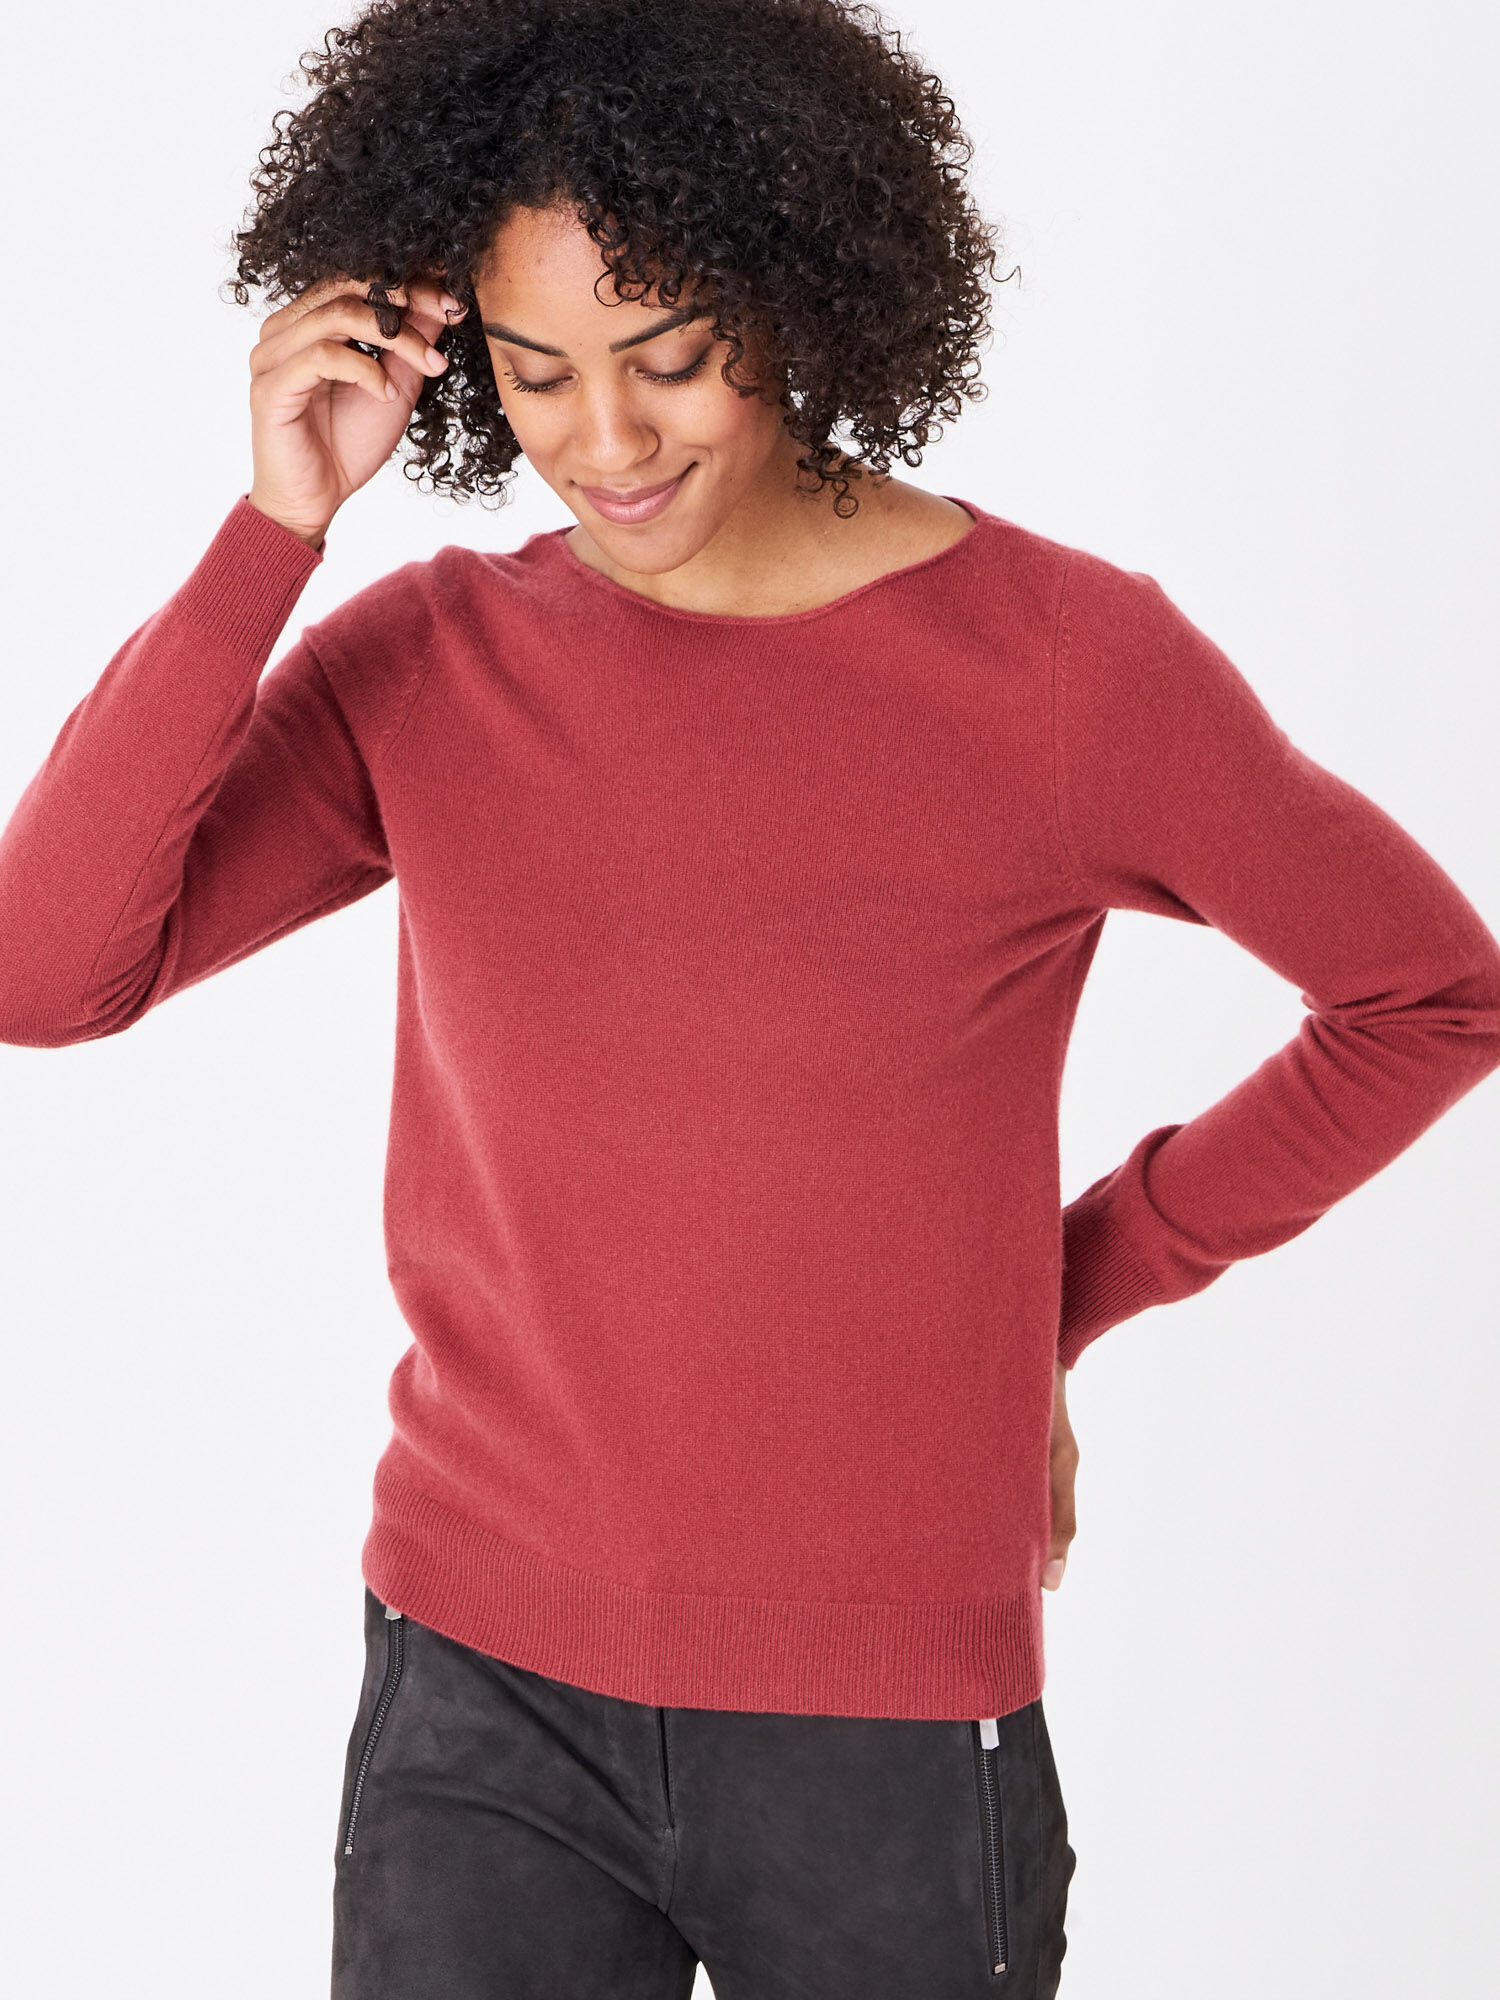 REPEAT cashmere Cashmere trui met boothals